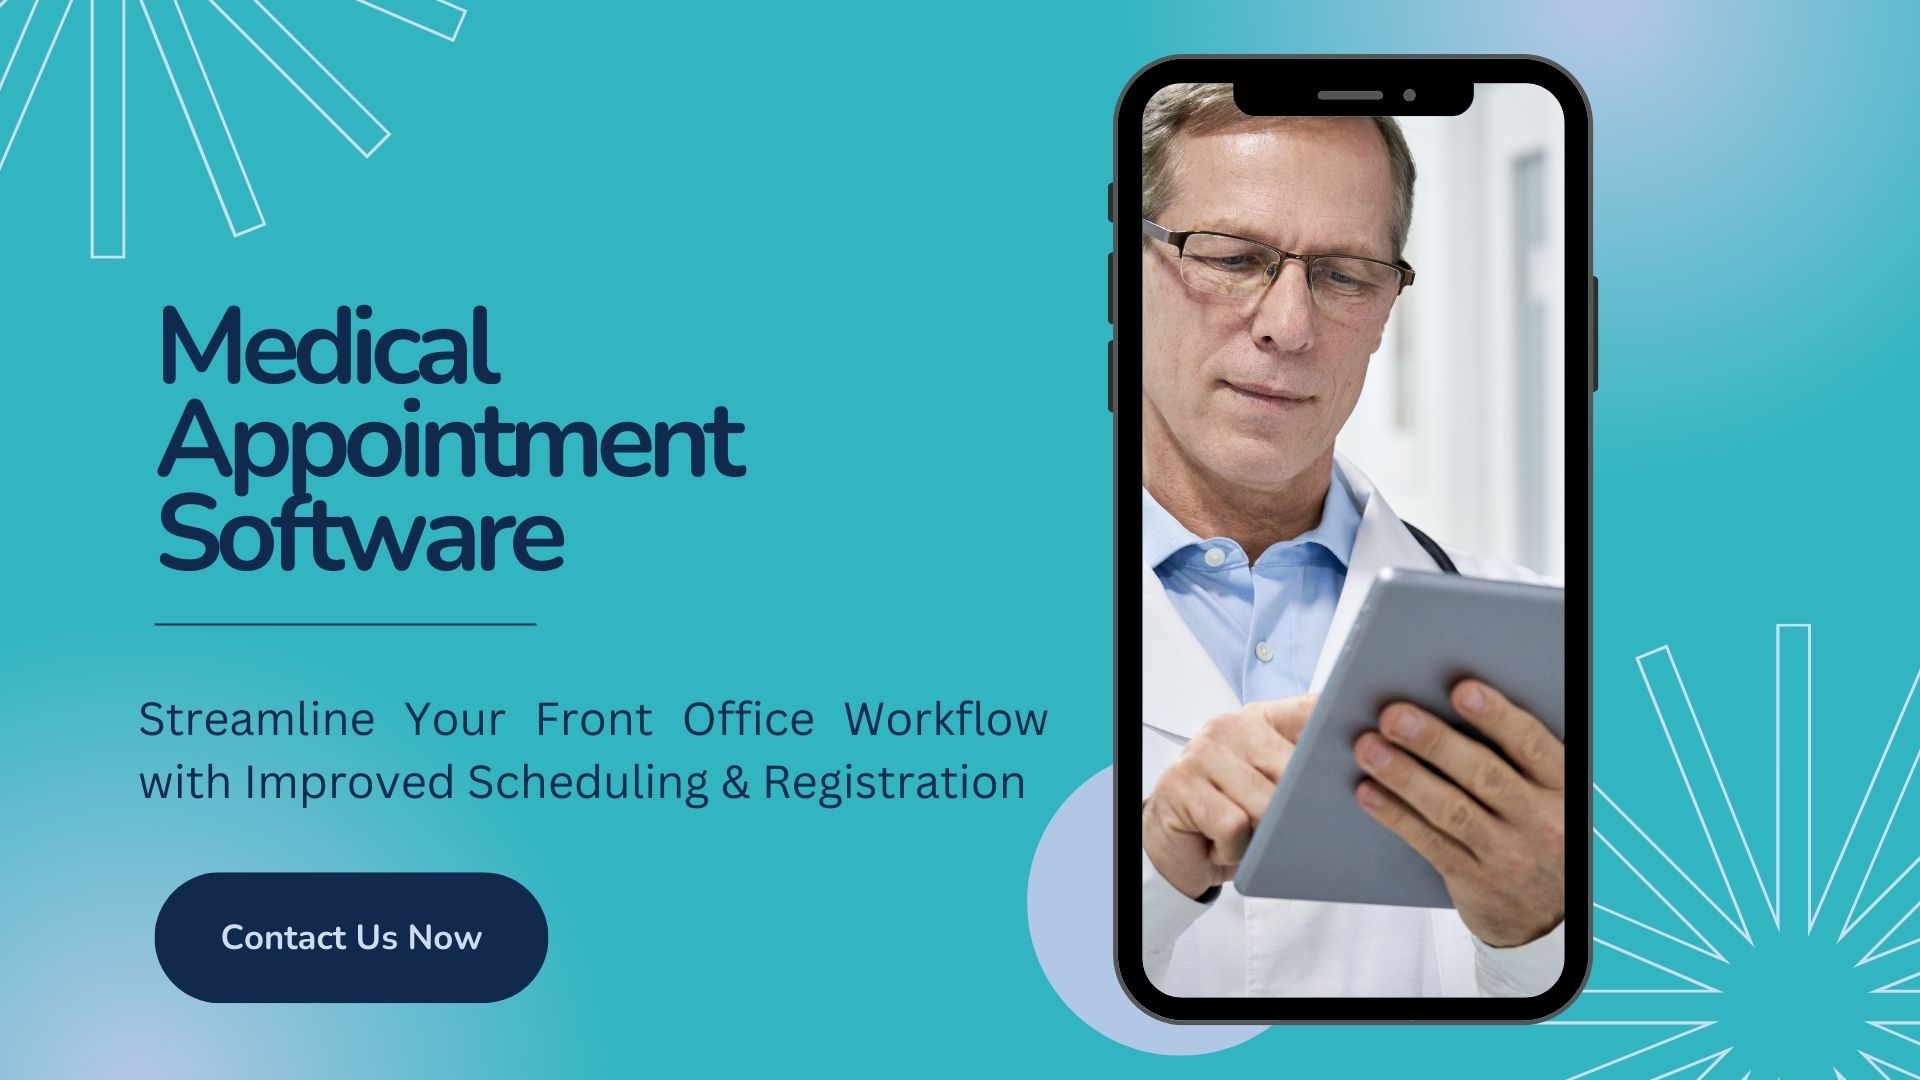 Medical
Appointment
Software

Streamline Your Front Office Workflow
with Improved Scheduling & Registration